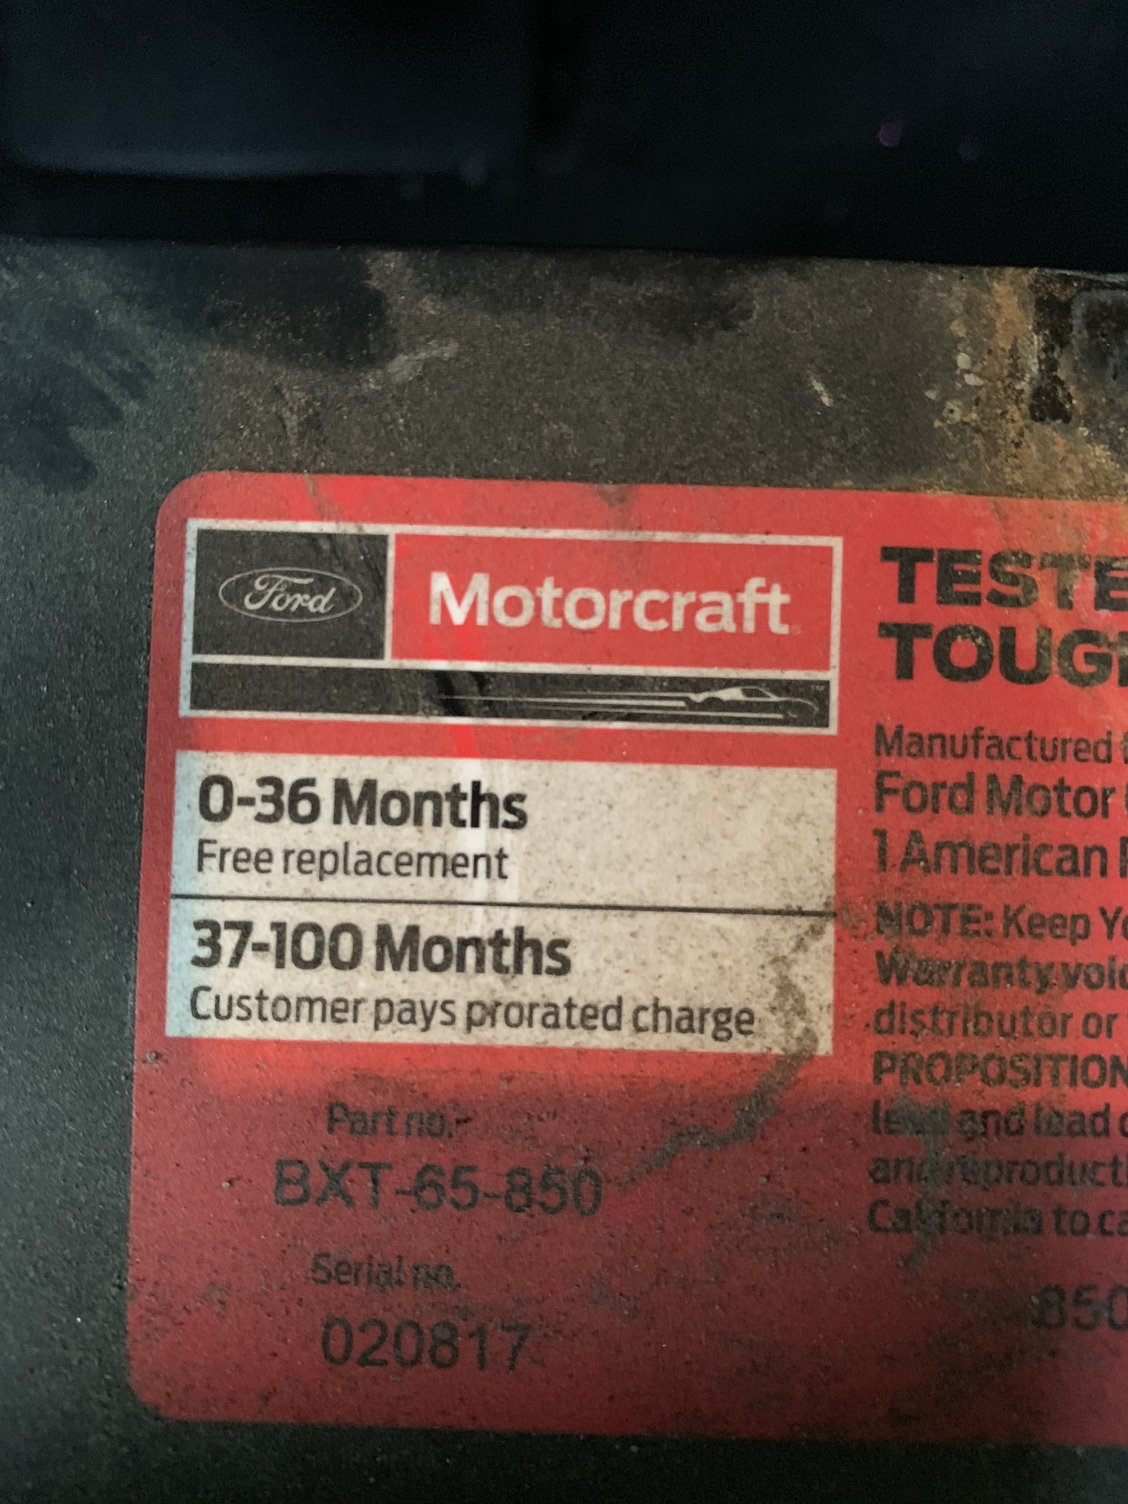 motorcraft-battery-prorated-warranty-chart-reviews-of-chart